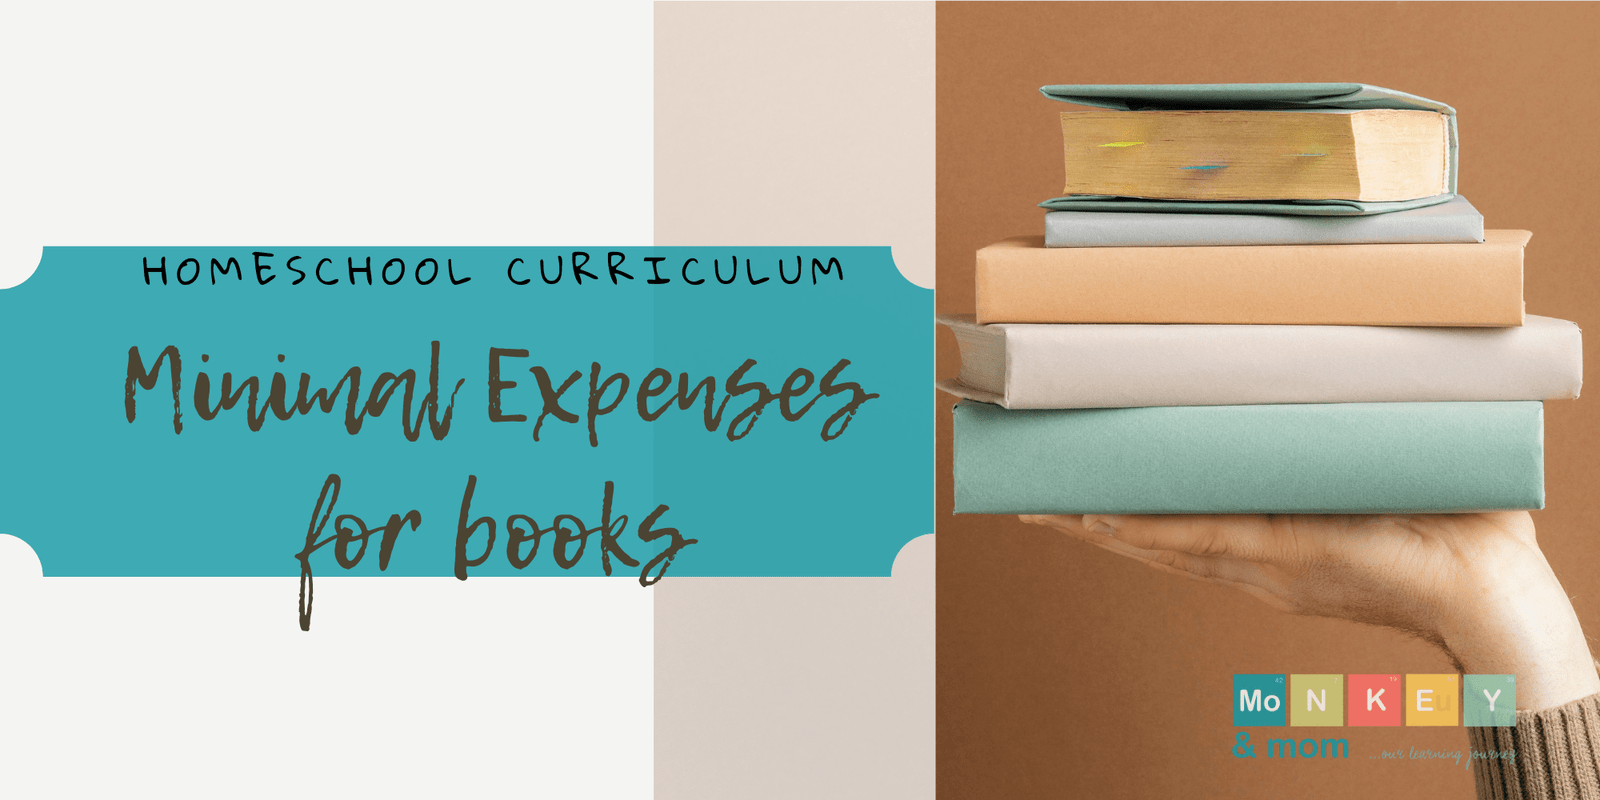 How to find cheap books and textbooks for homeschooling